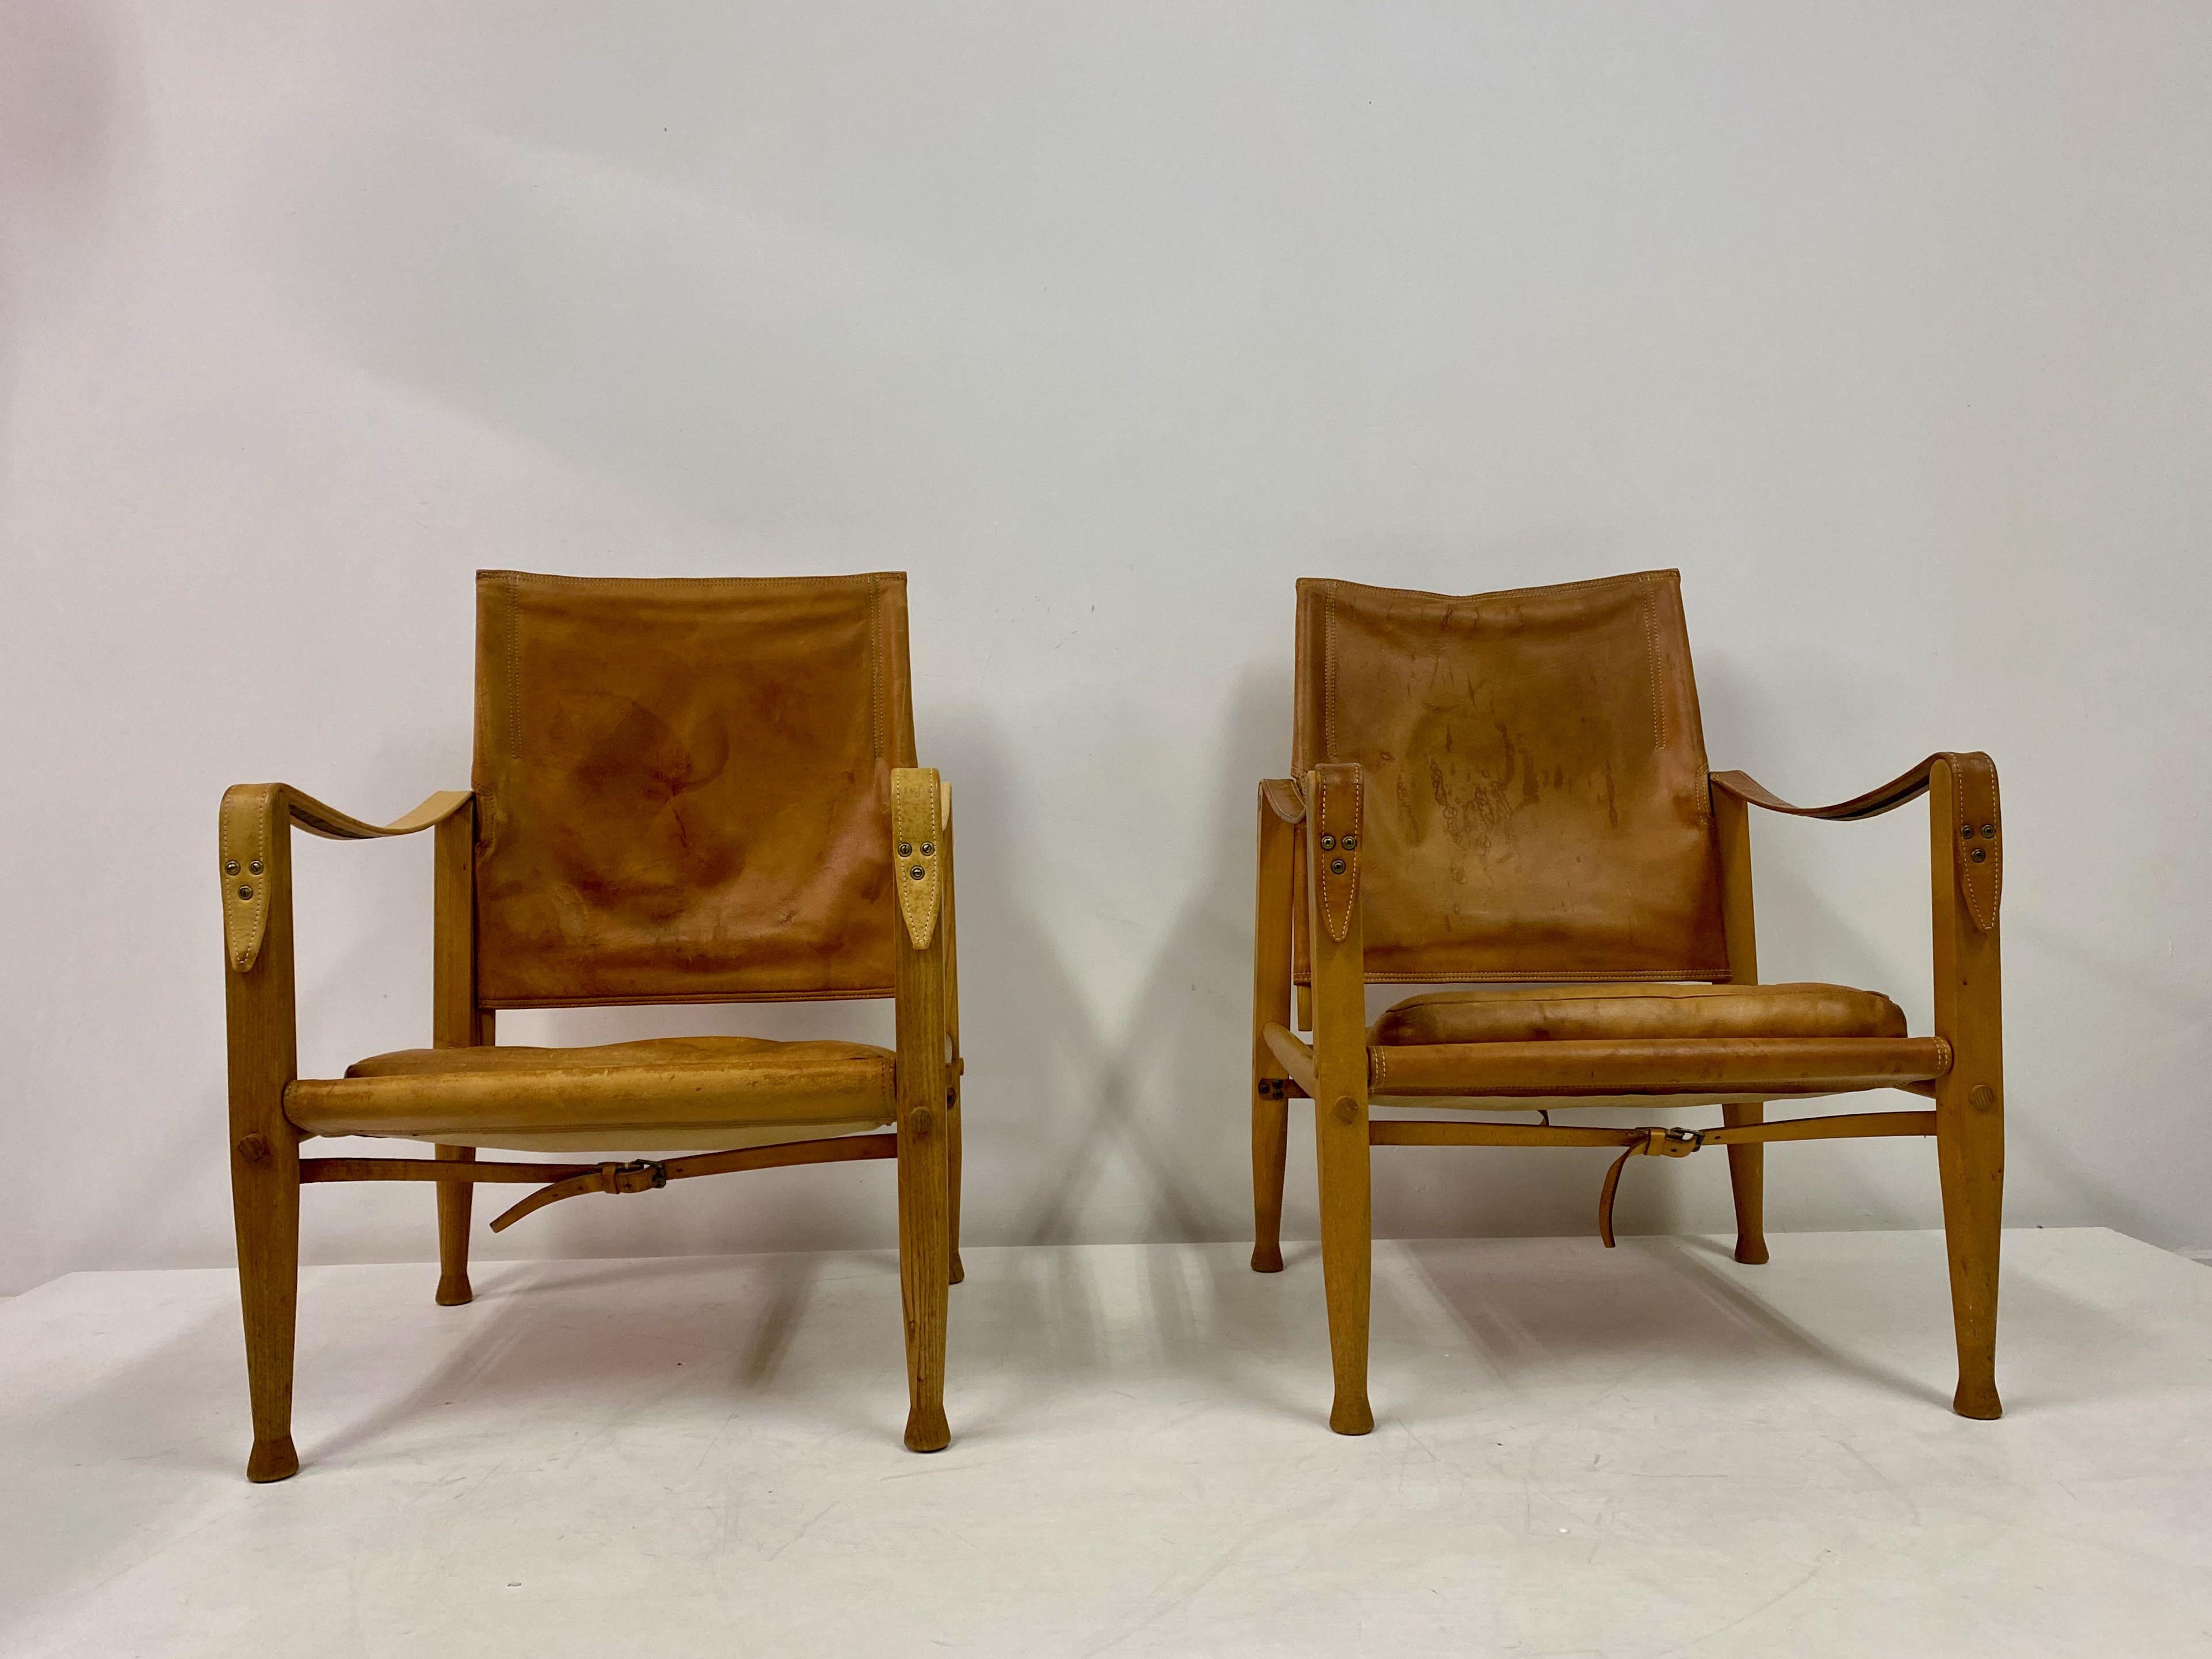 Matched pair of Safari chairs

By Kaare Klint

For Rud Rasmussen

Ash and patinated leather

Designed 1933

Frames with impressed 'Denmark